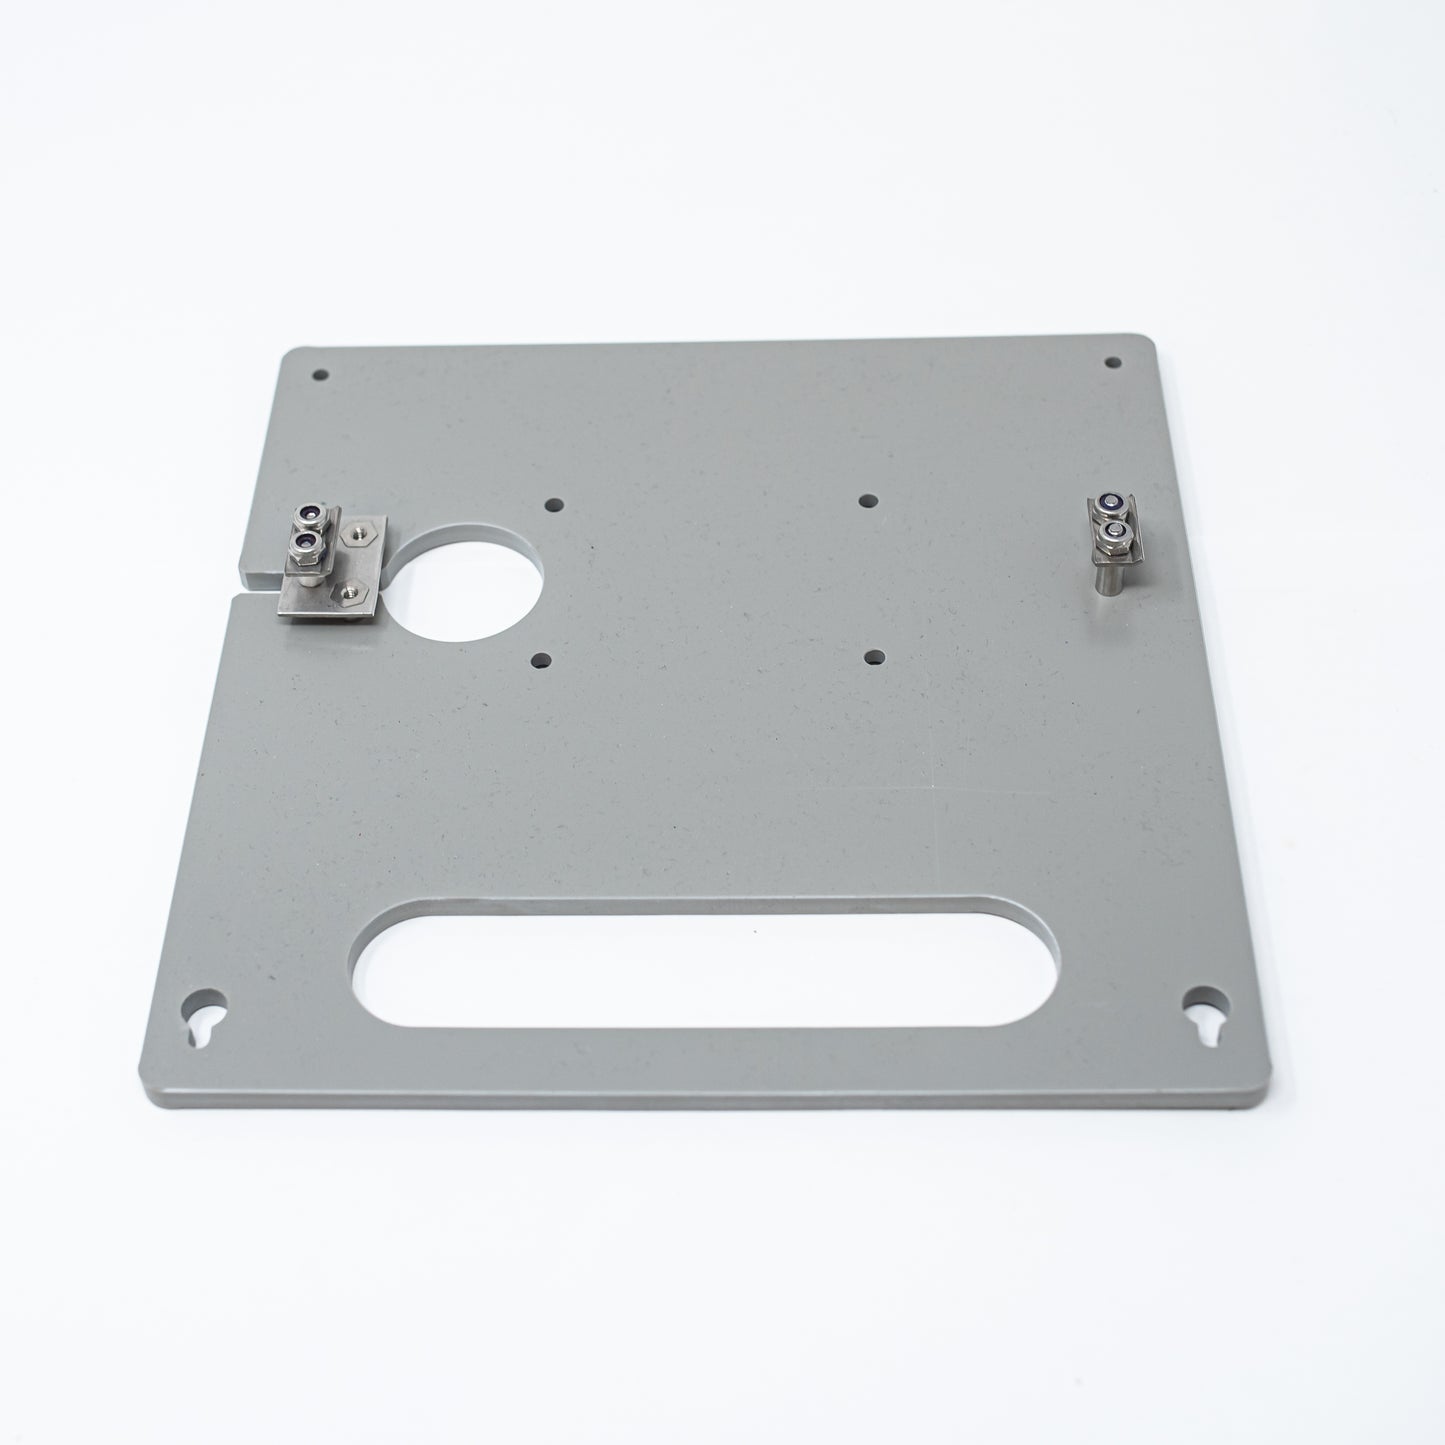 Plastic mounting plate